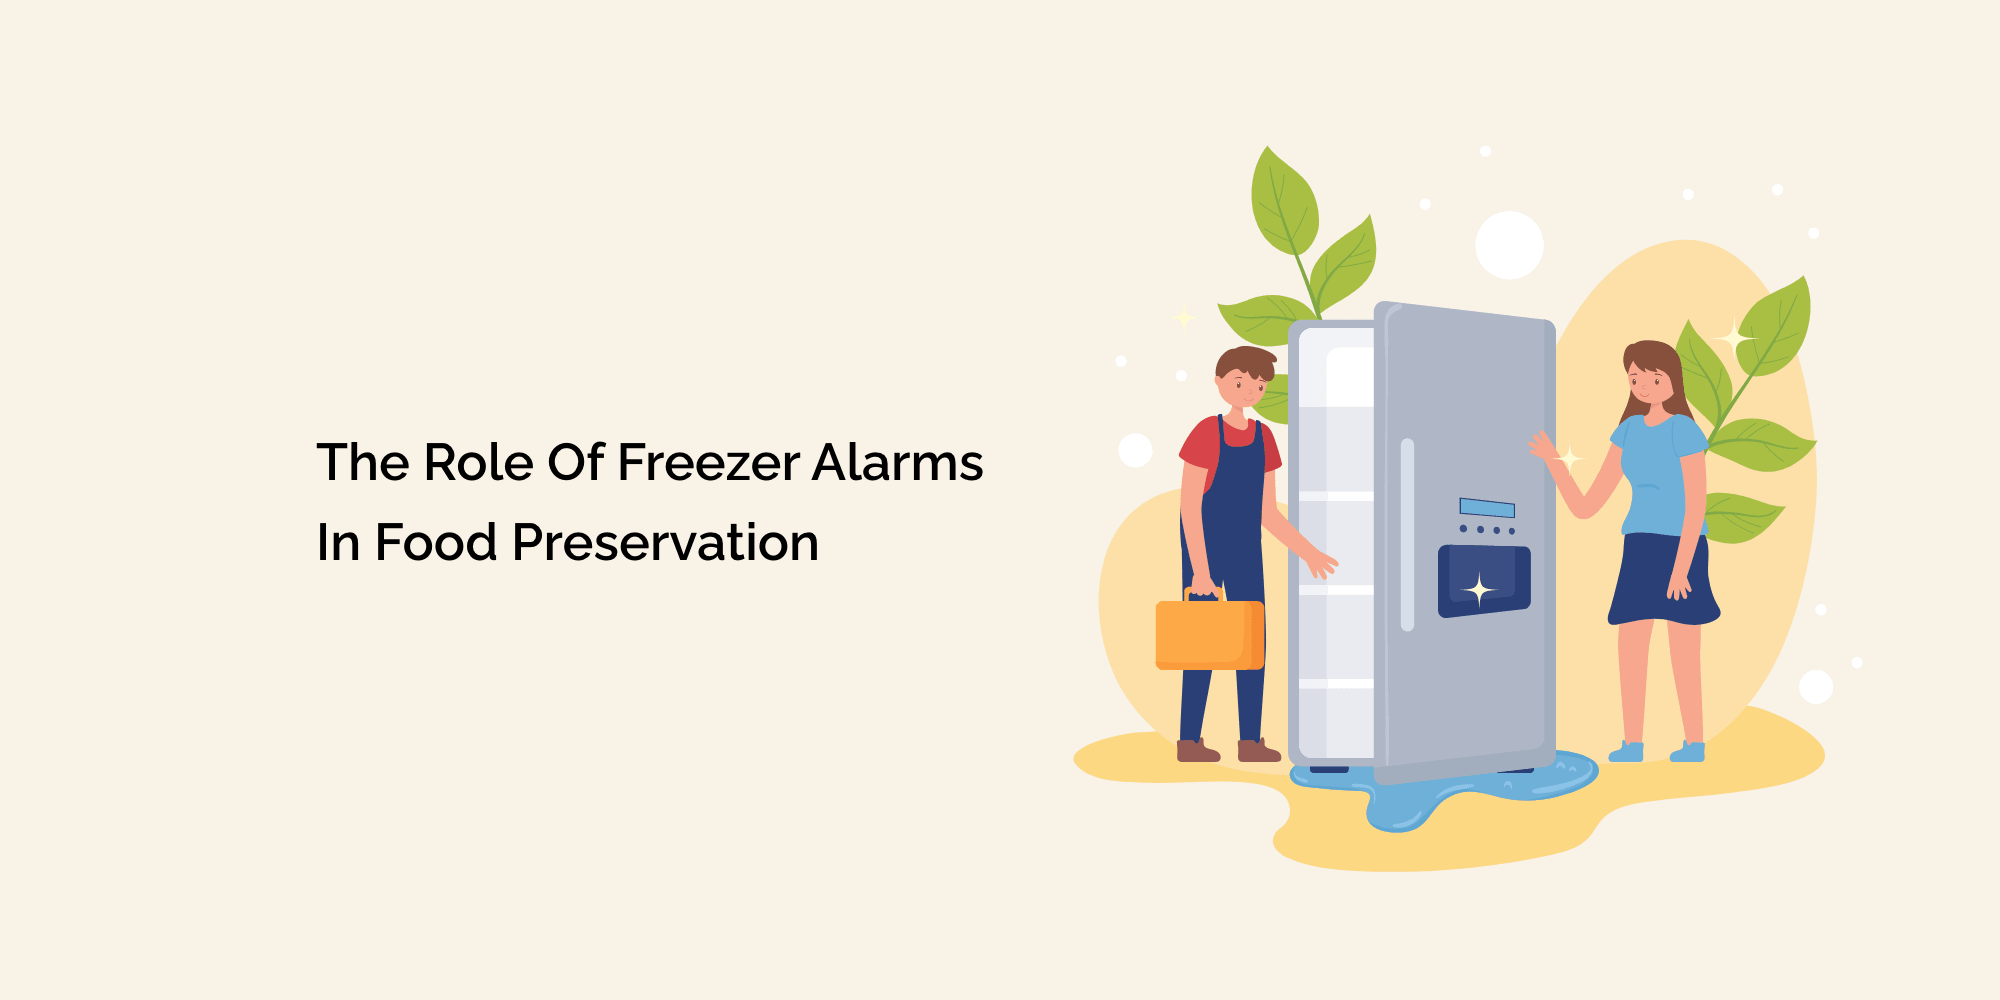 The Role of Freezer Alarms in Food Preservation